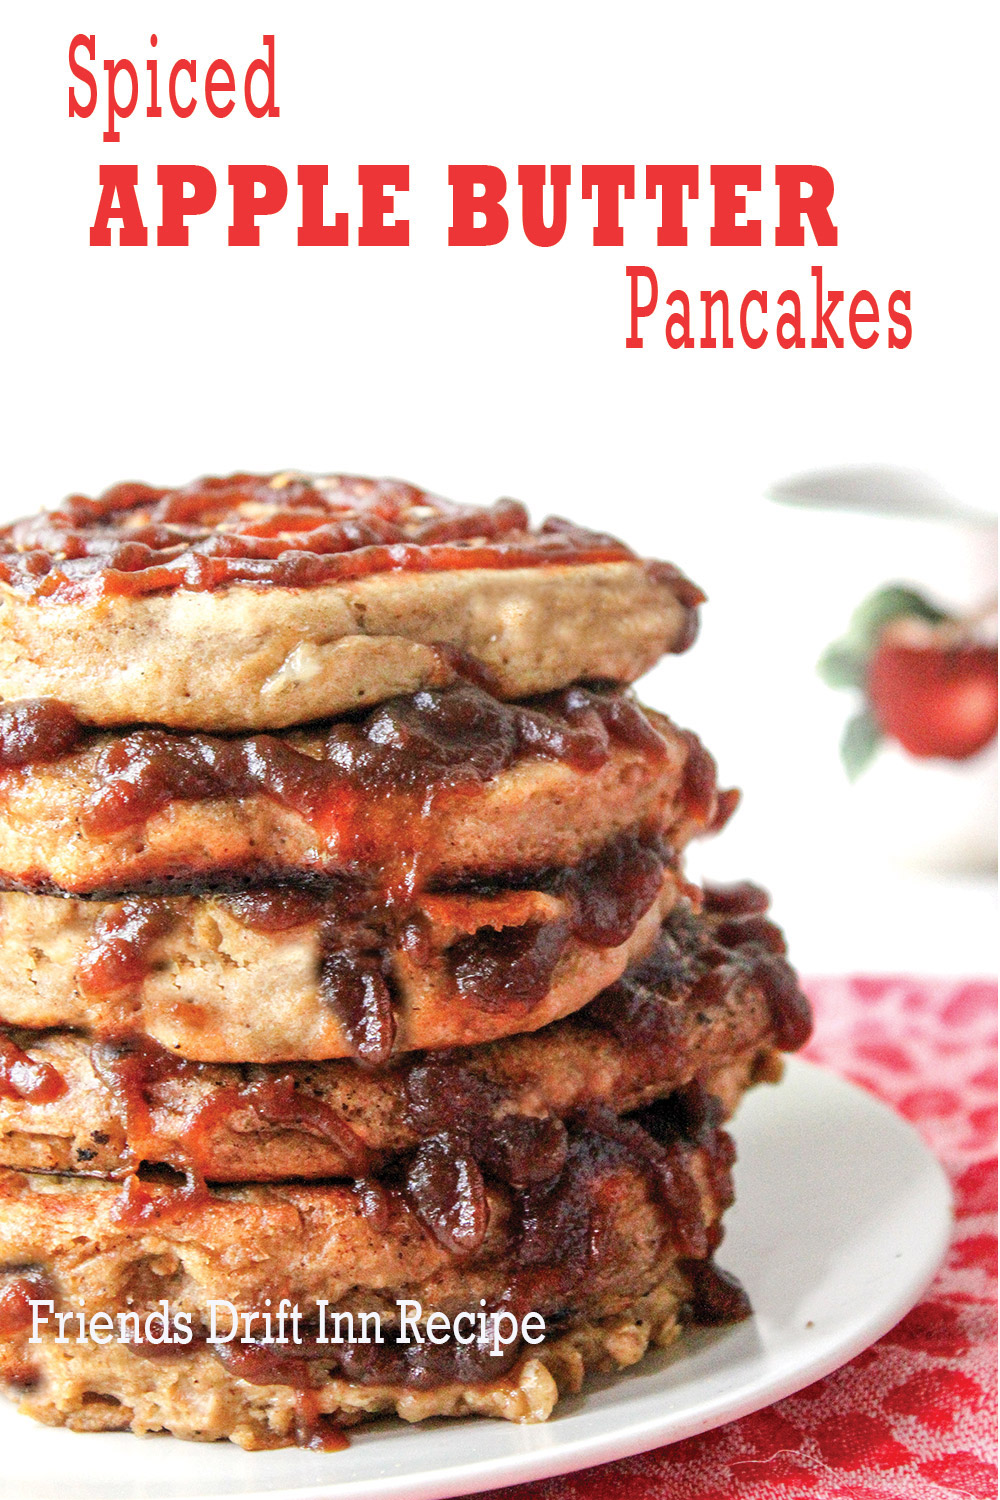 Stack of spiced apple butter pancakes with apple butter filling